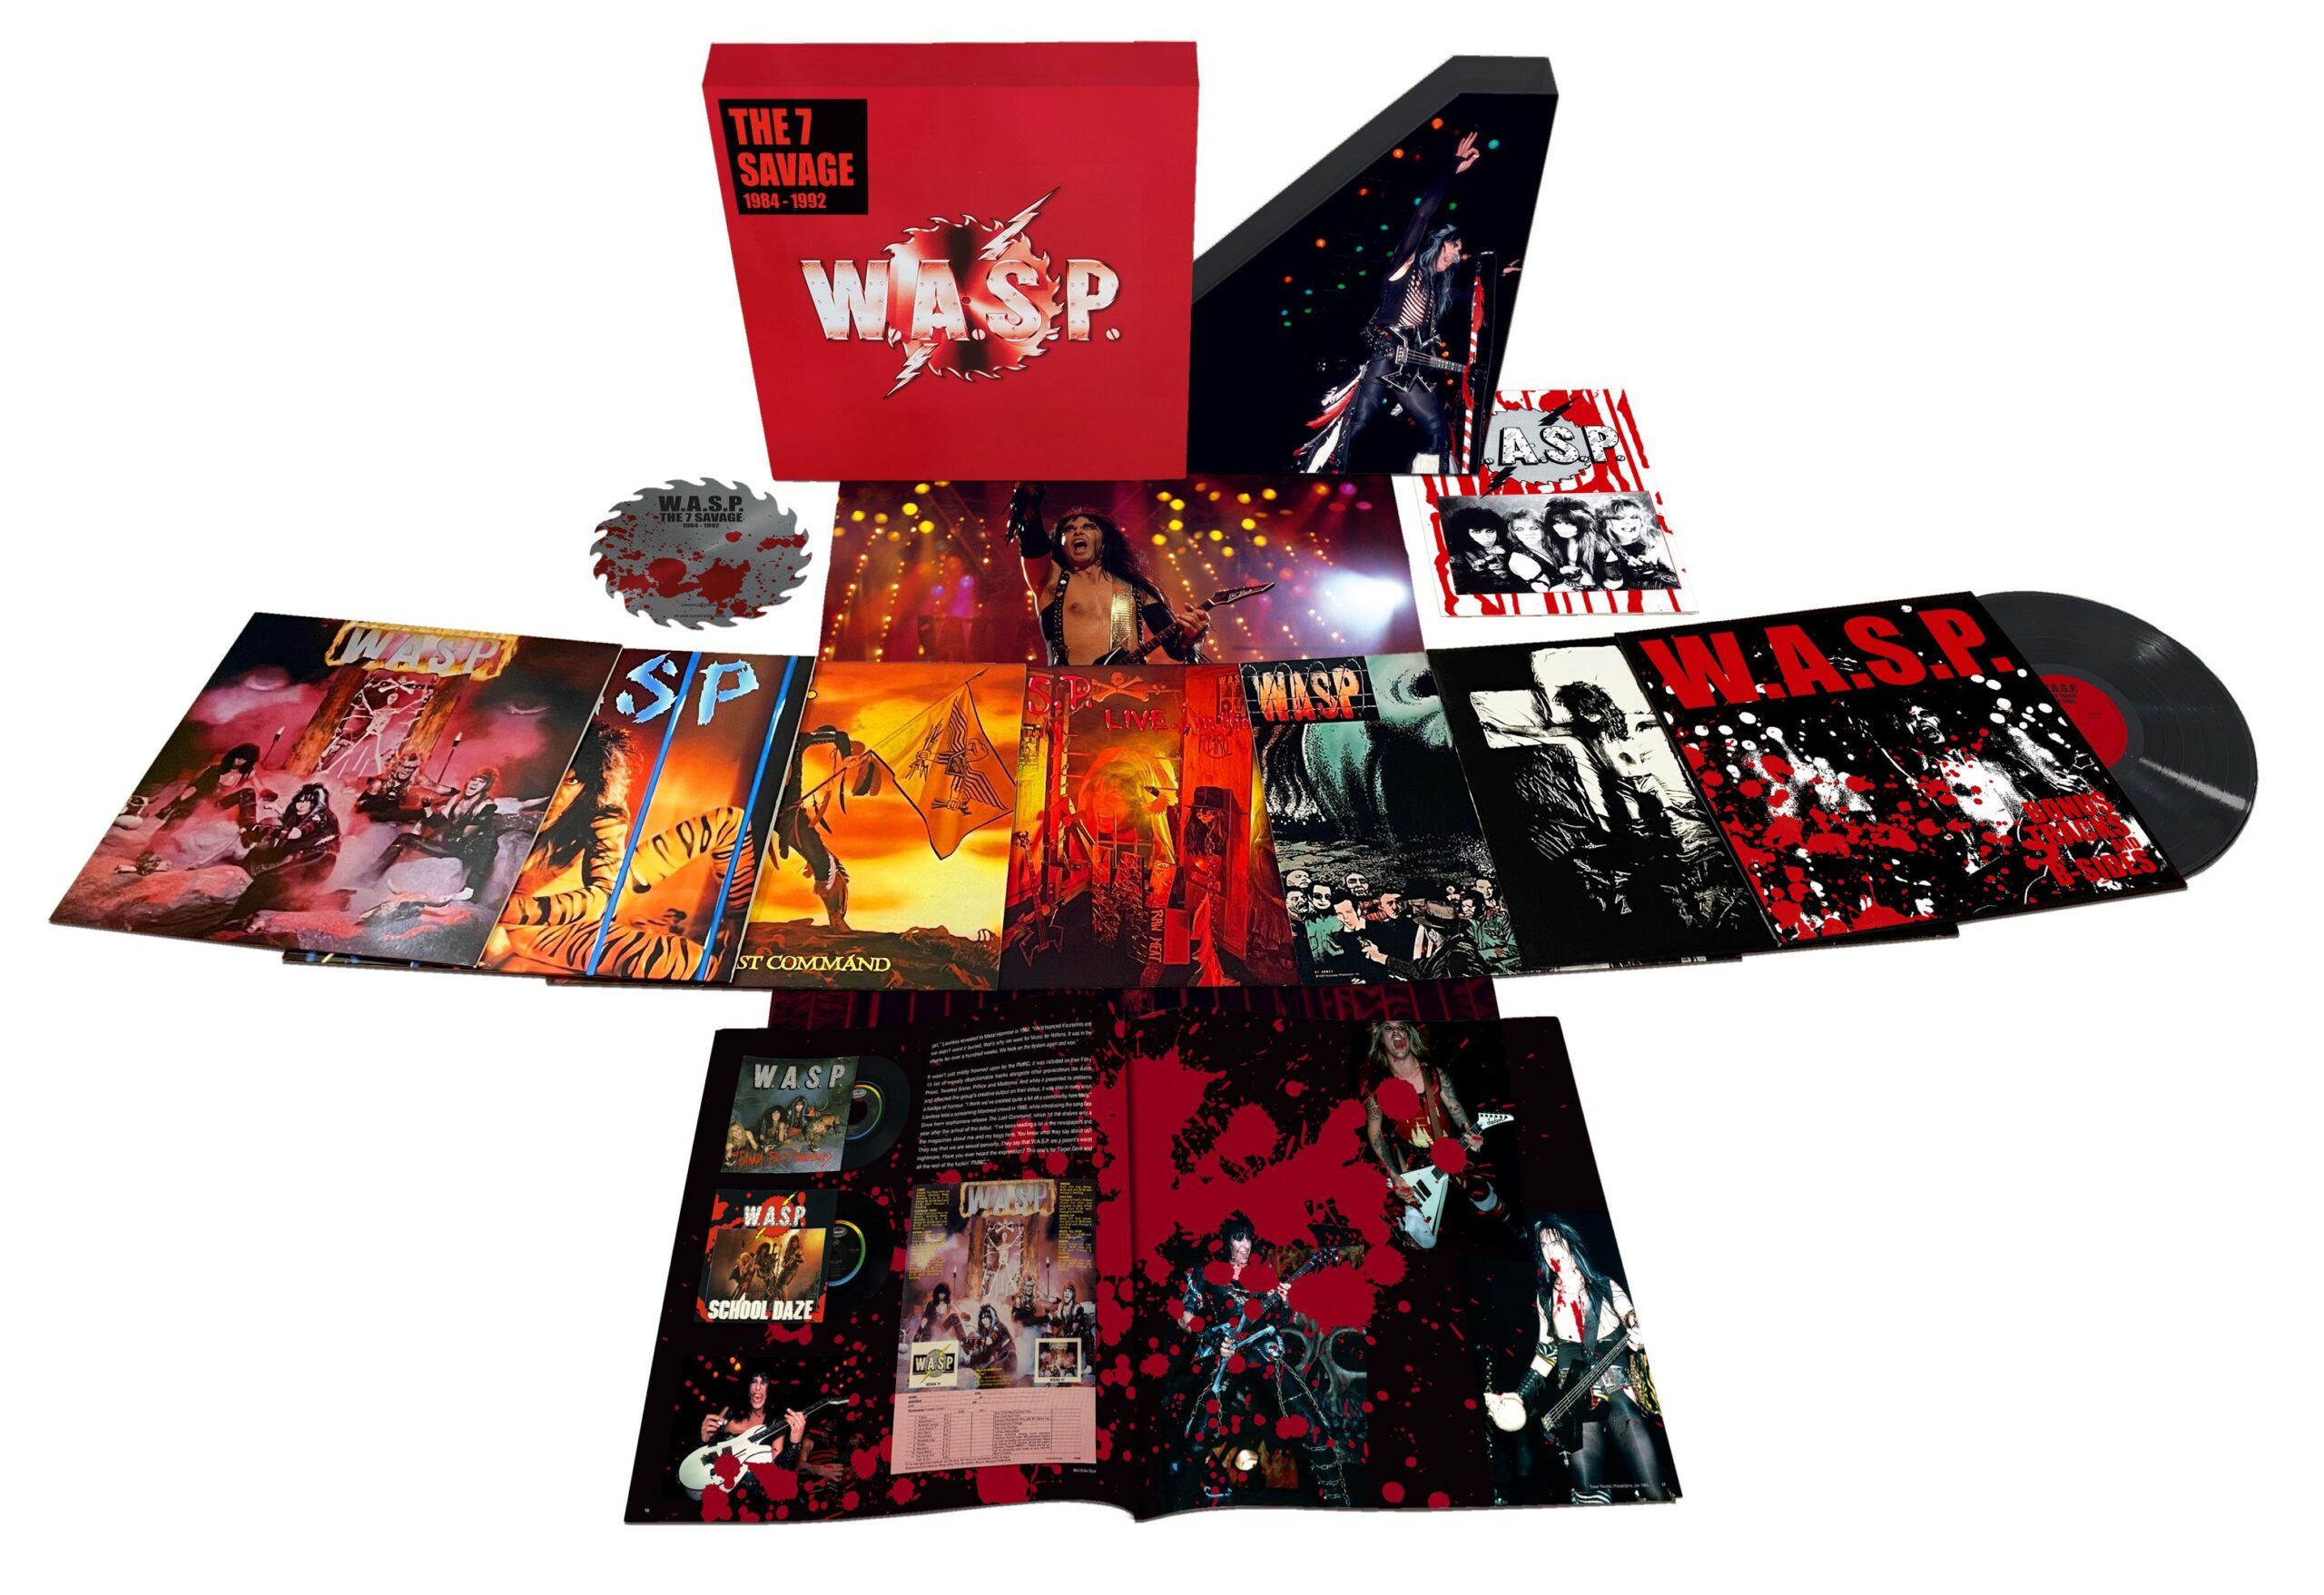 W.A.S.P. - "The 7 Savage"